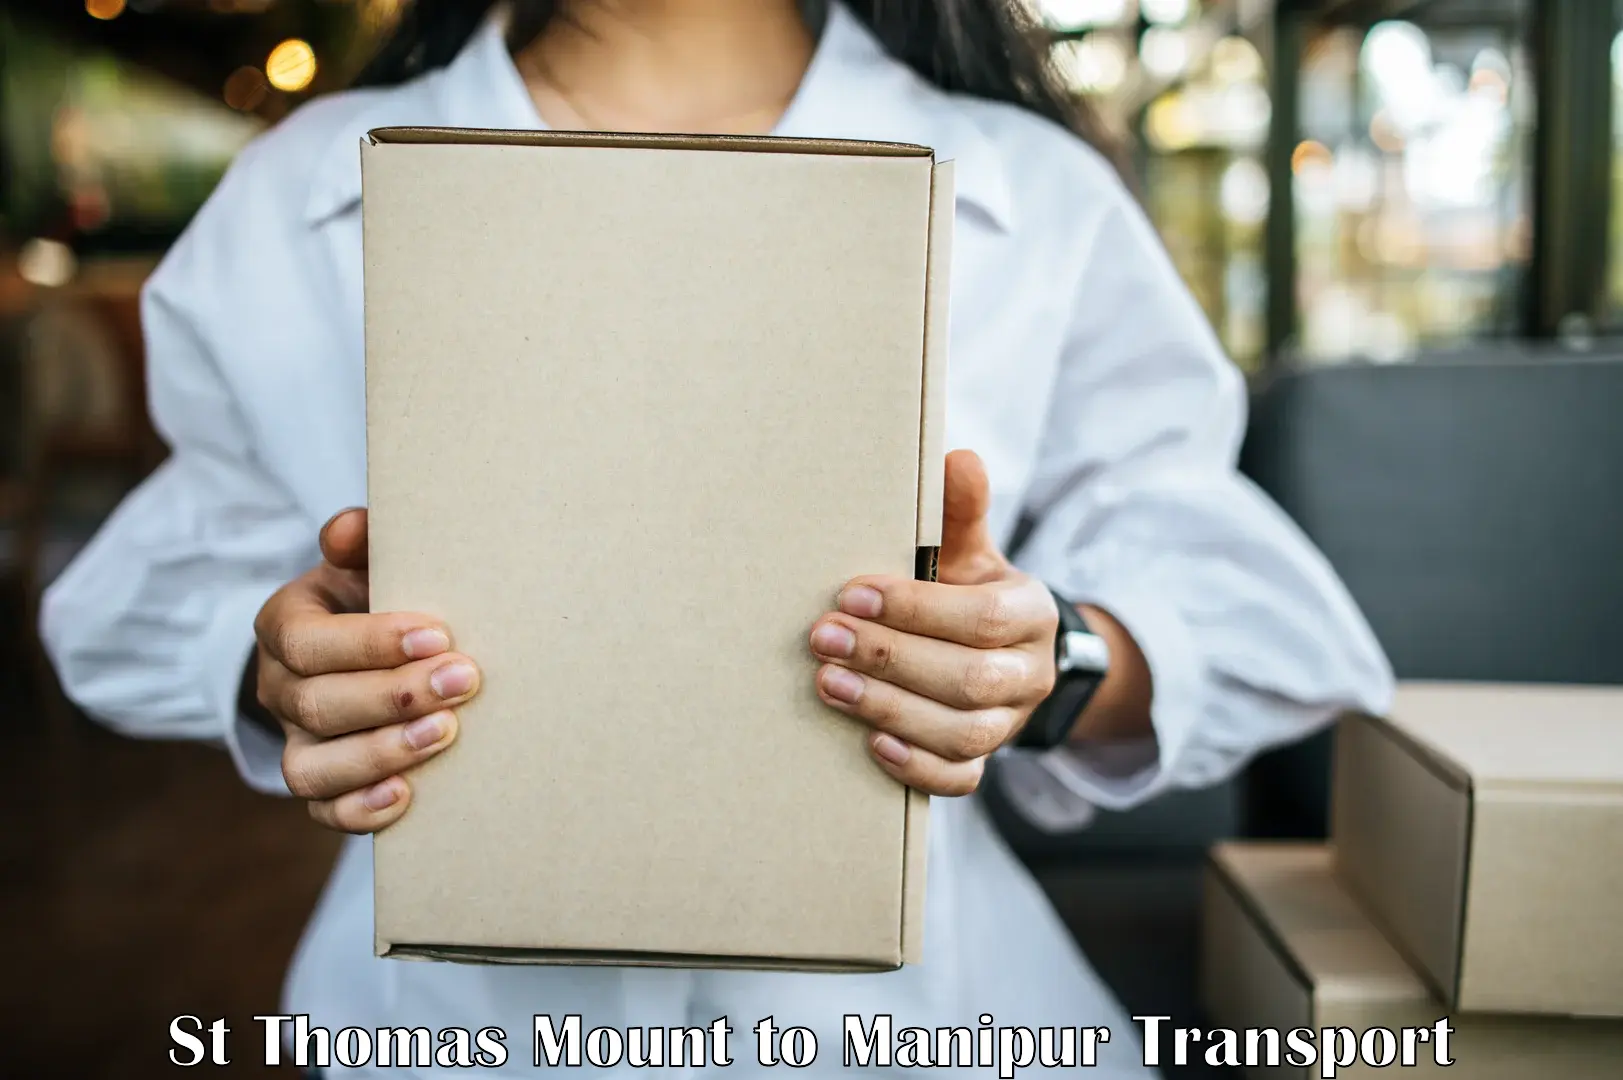 Daily transport service St Thomas Mount to Manipur